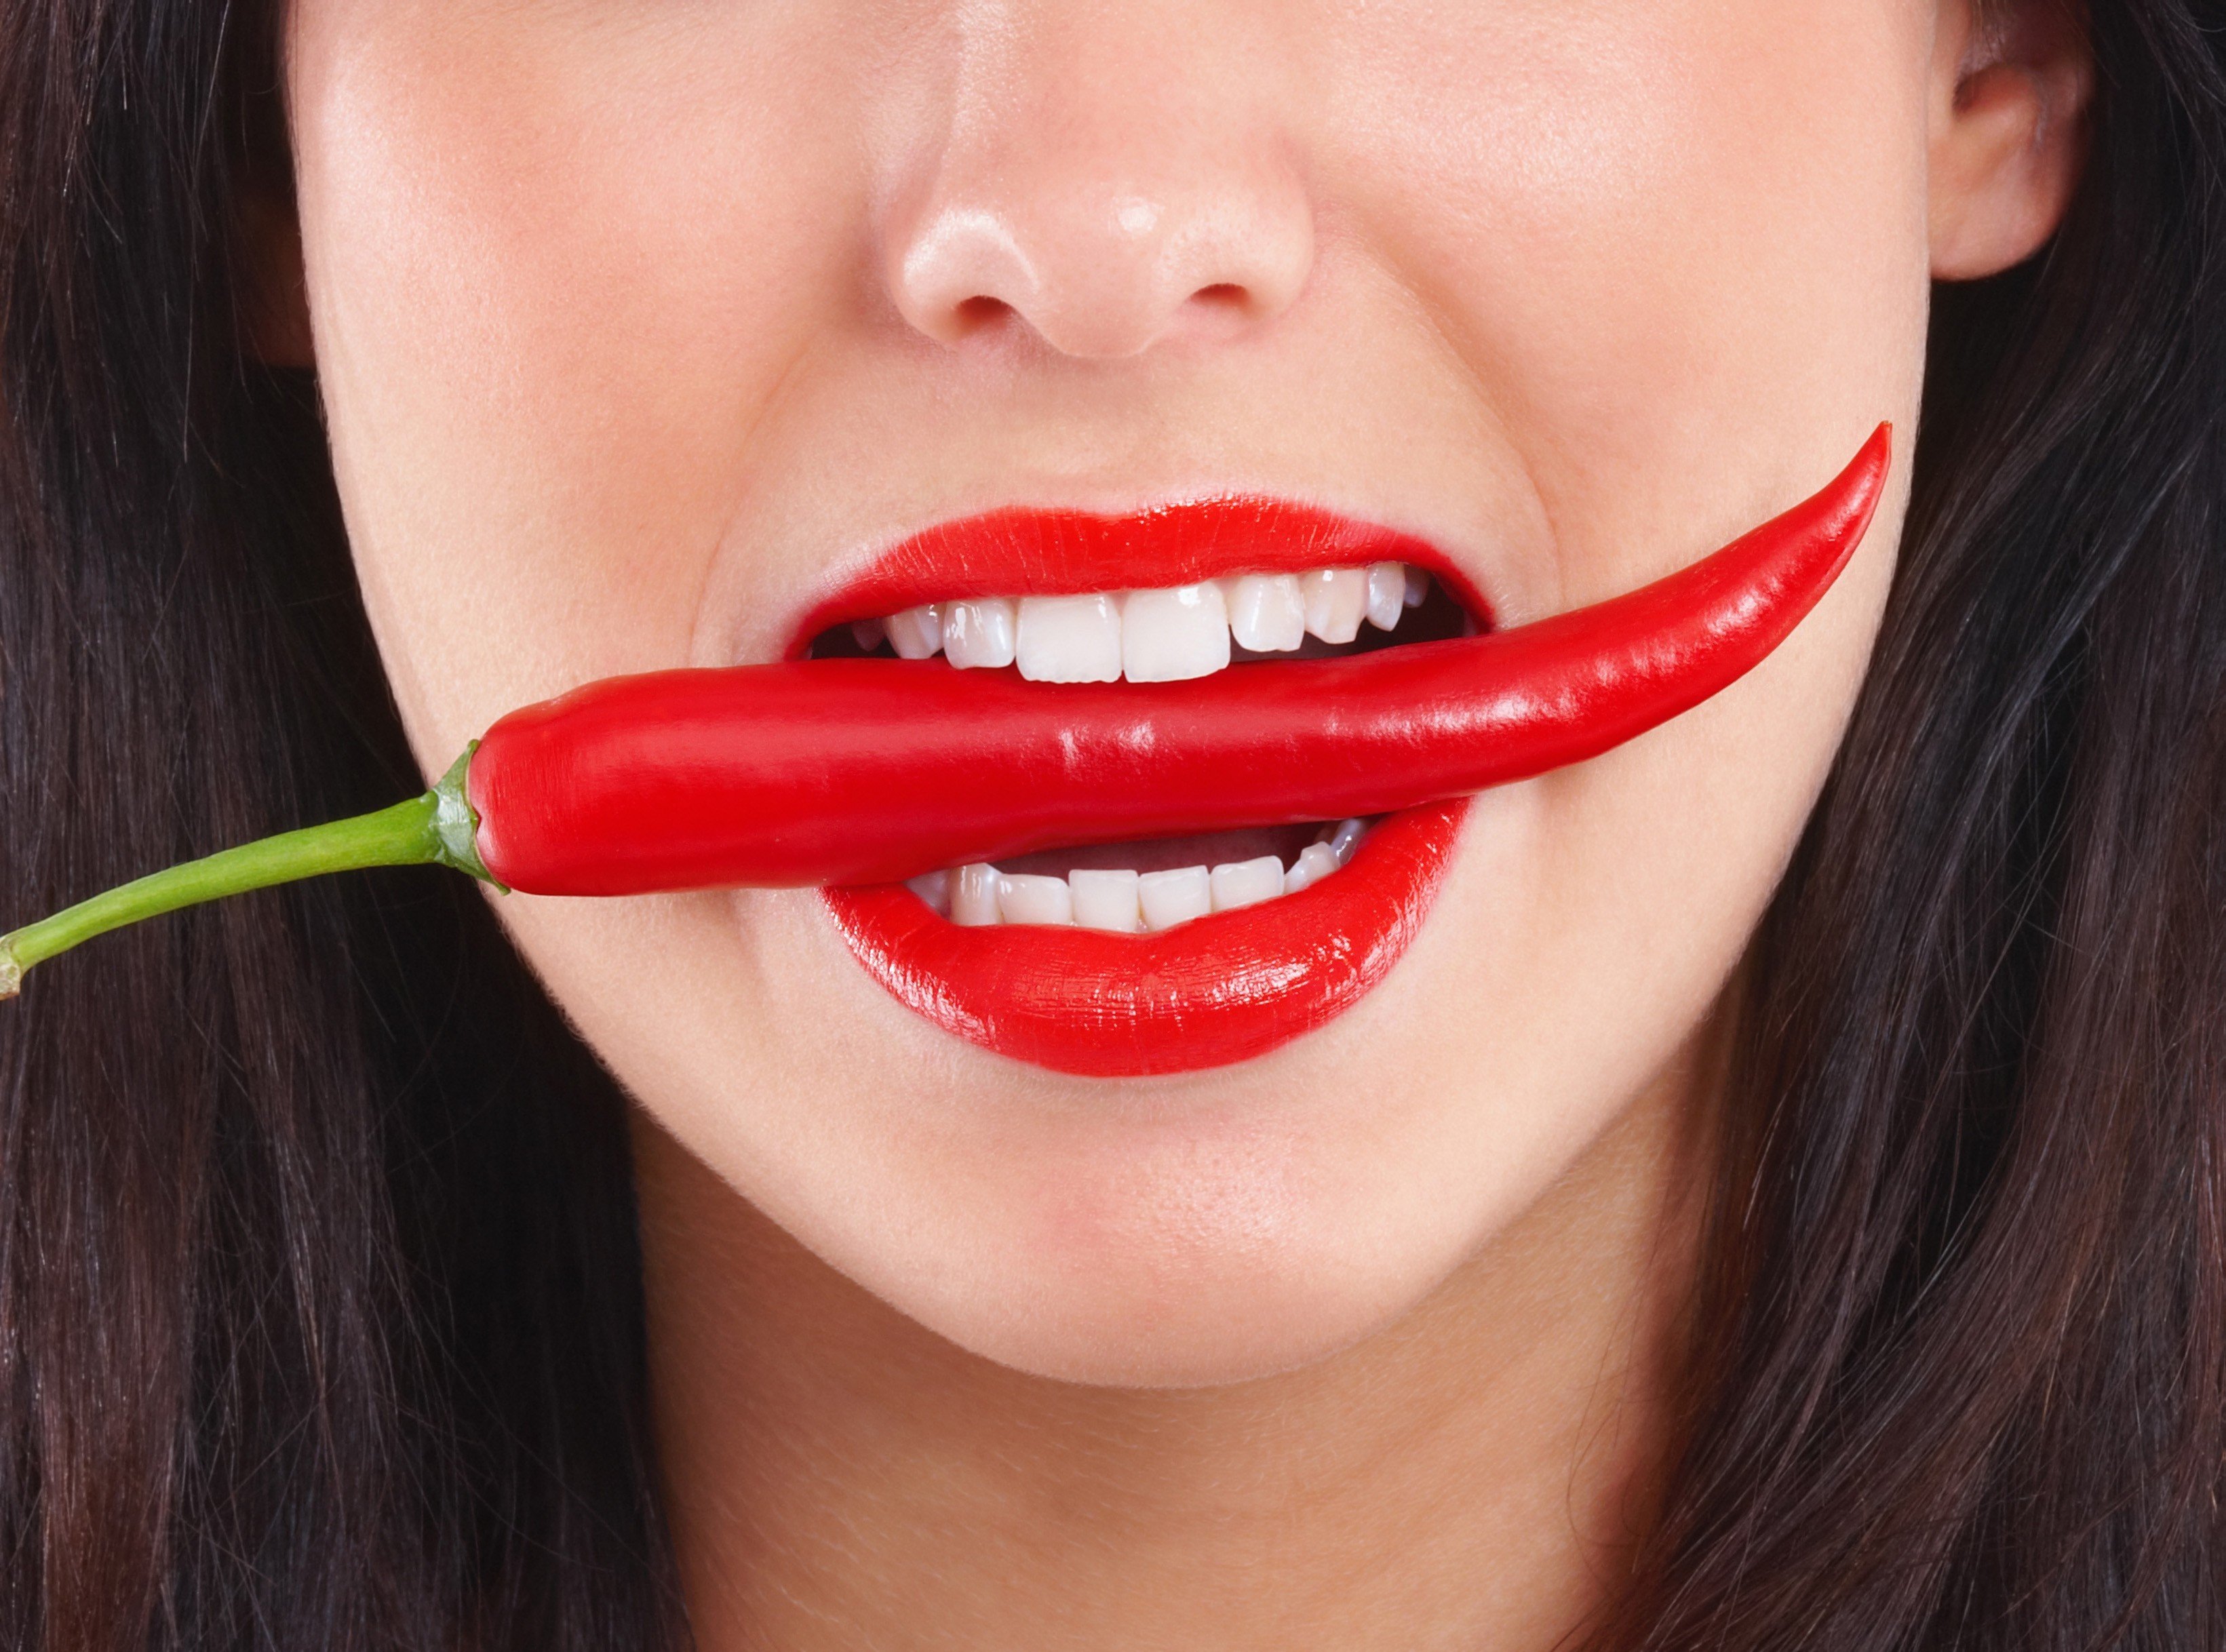 Chilli Peppers Juicy Lips Hd Wallpapers Desktop And Mobile Images, Photos, Reviews